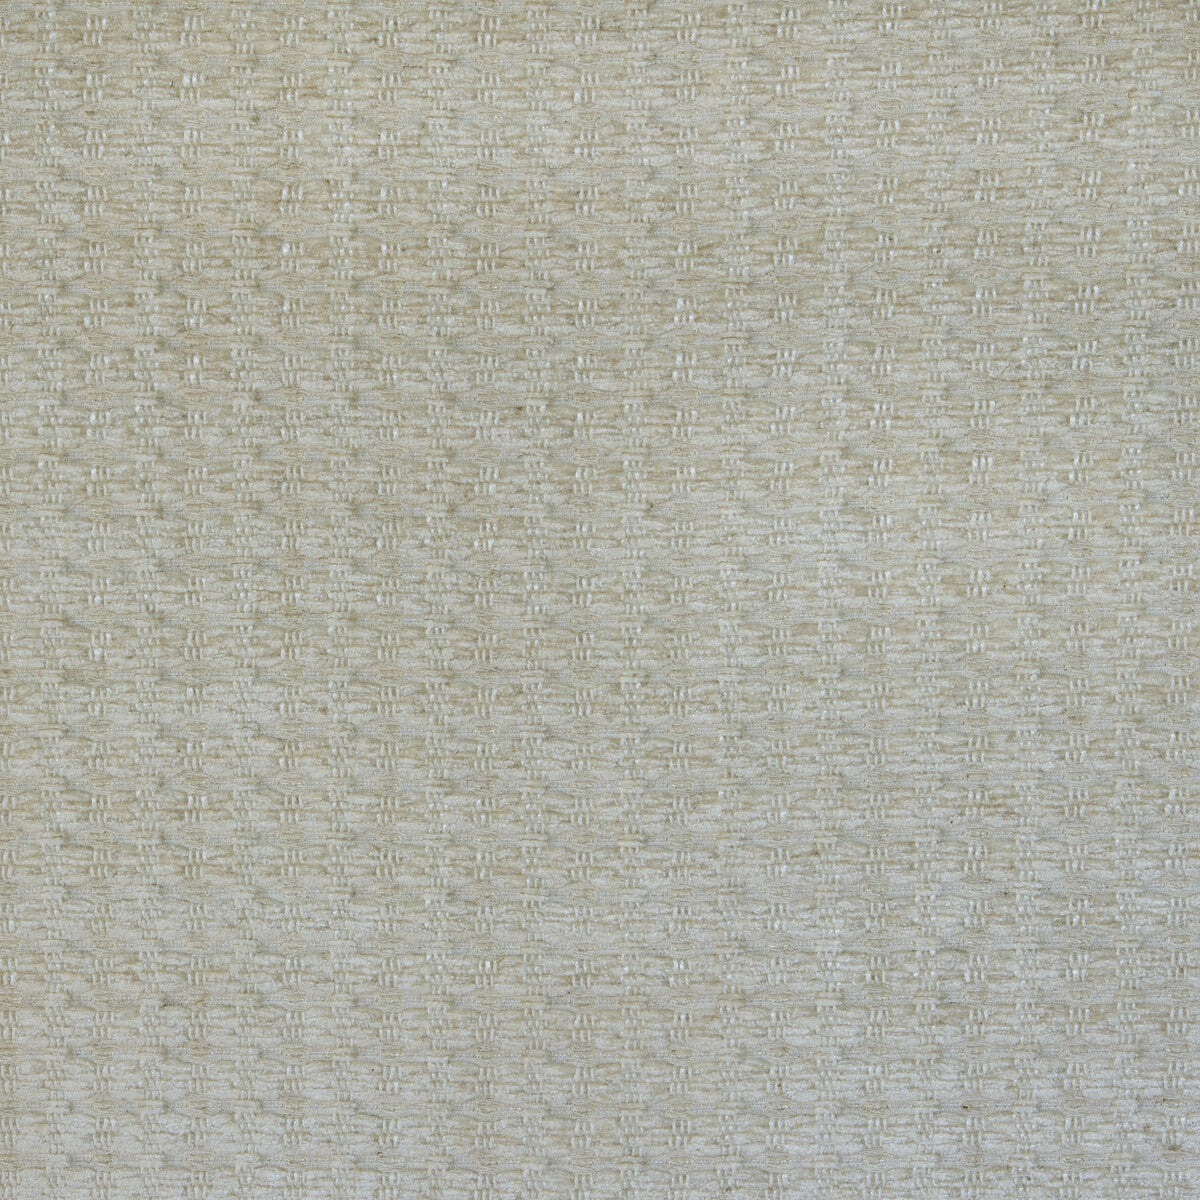 Ankh Chenille fabric in soy color - pattern 35855.1.0 - by Kravet Couture in the Windsor Smith Naila collection